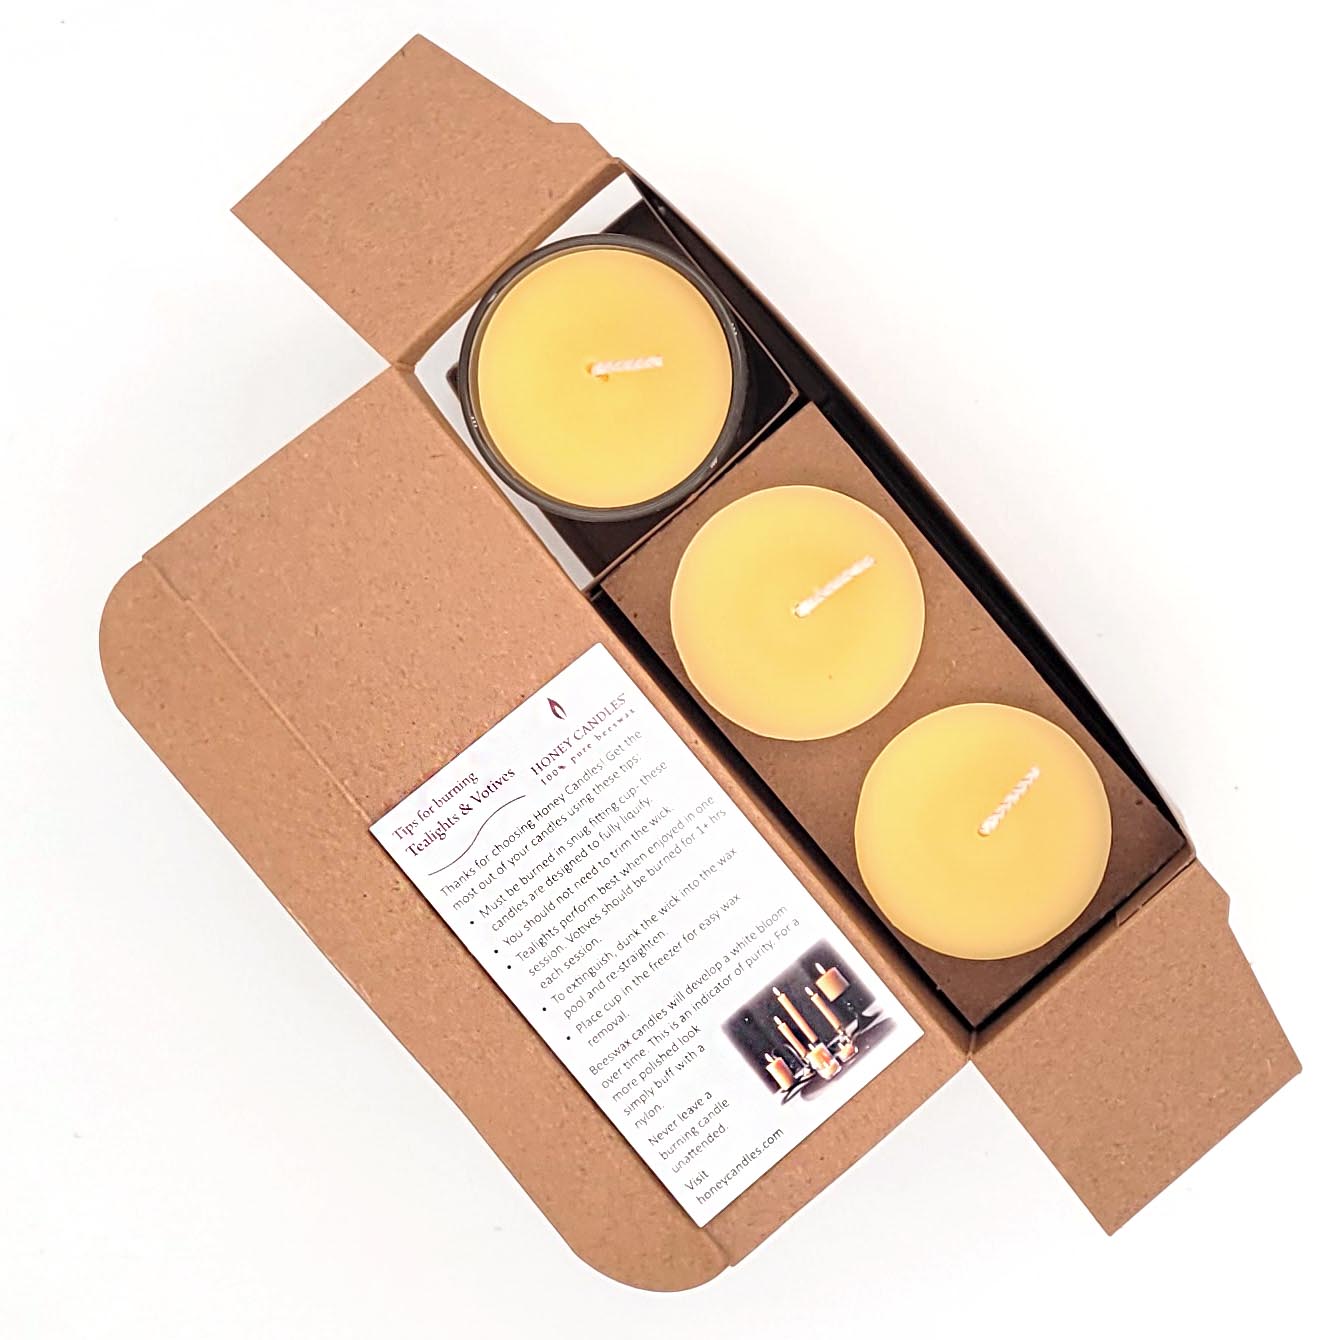 Inside view of beeswax votive gift box